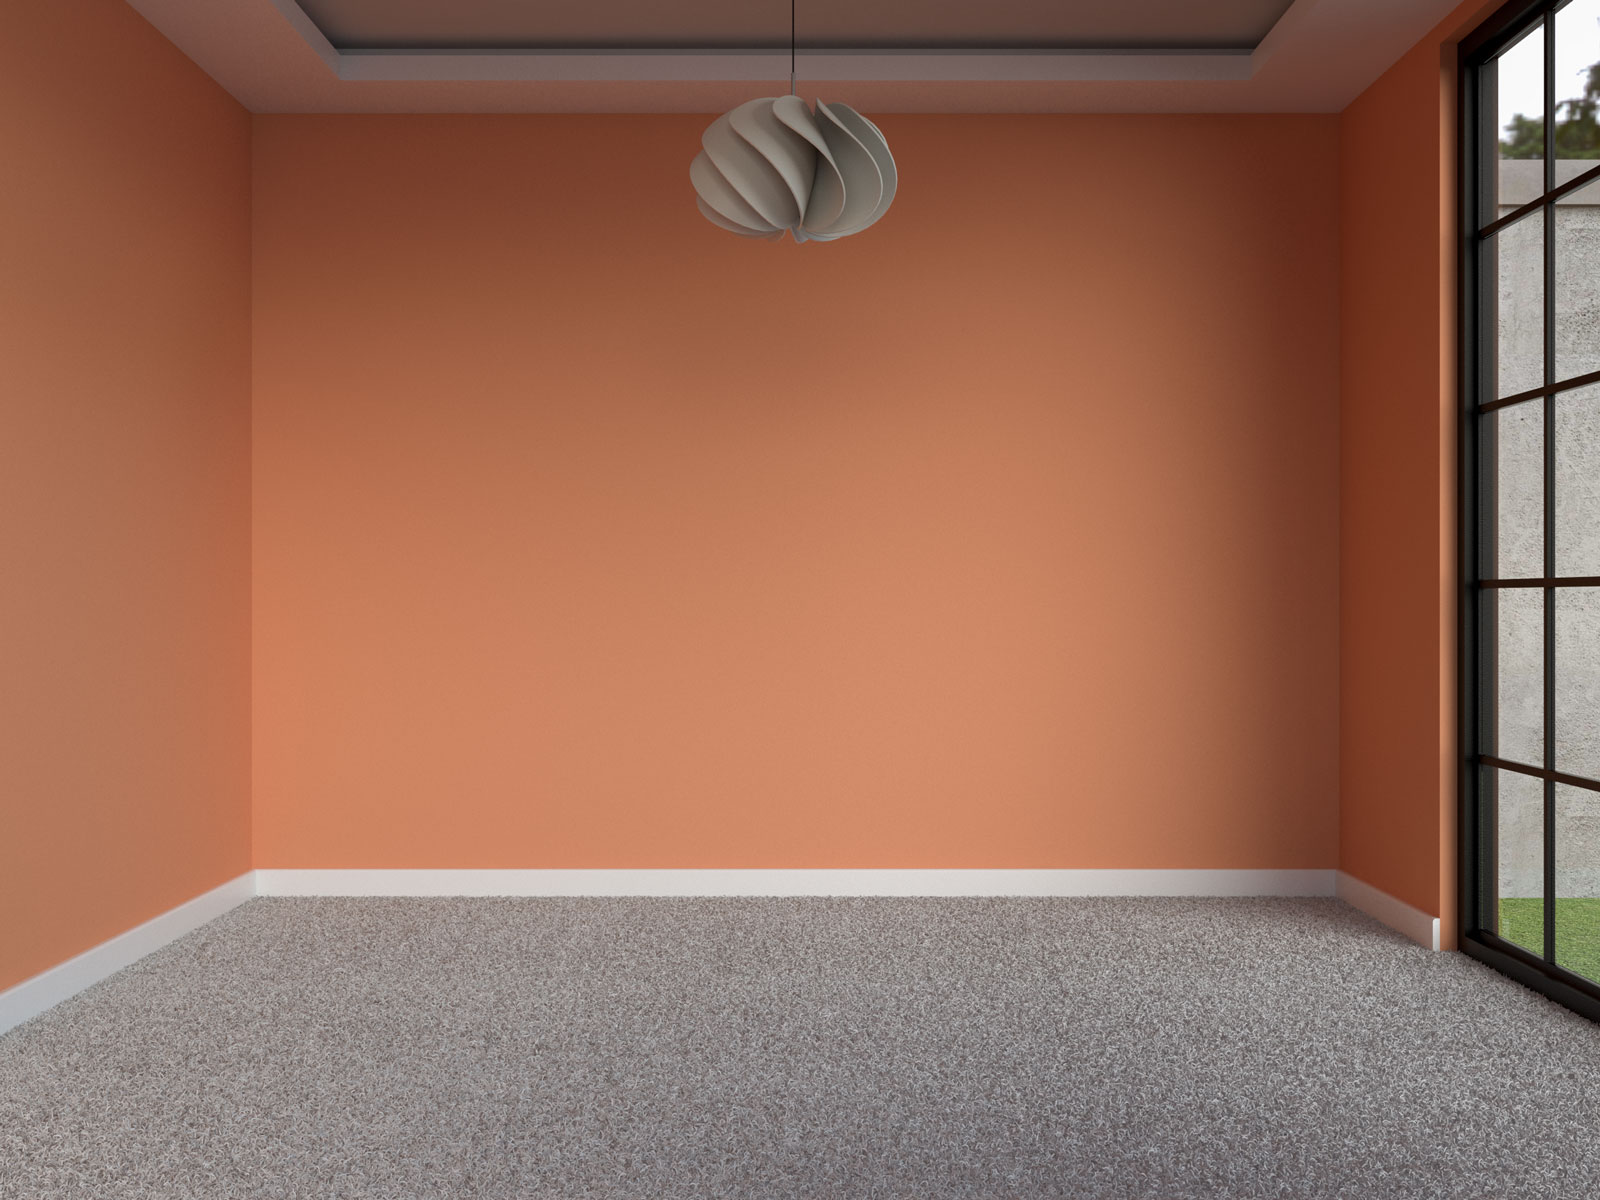 Terracotta walls with gray carpet